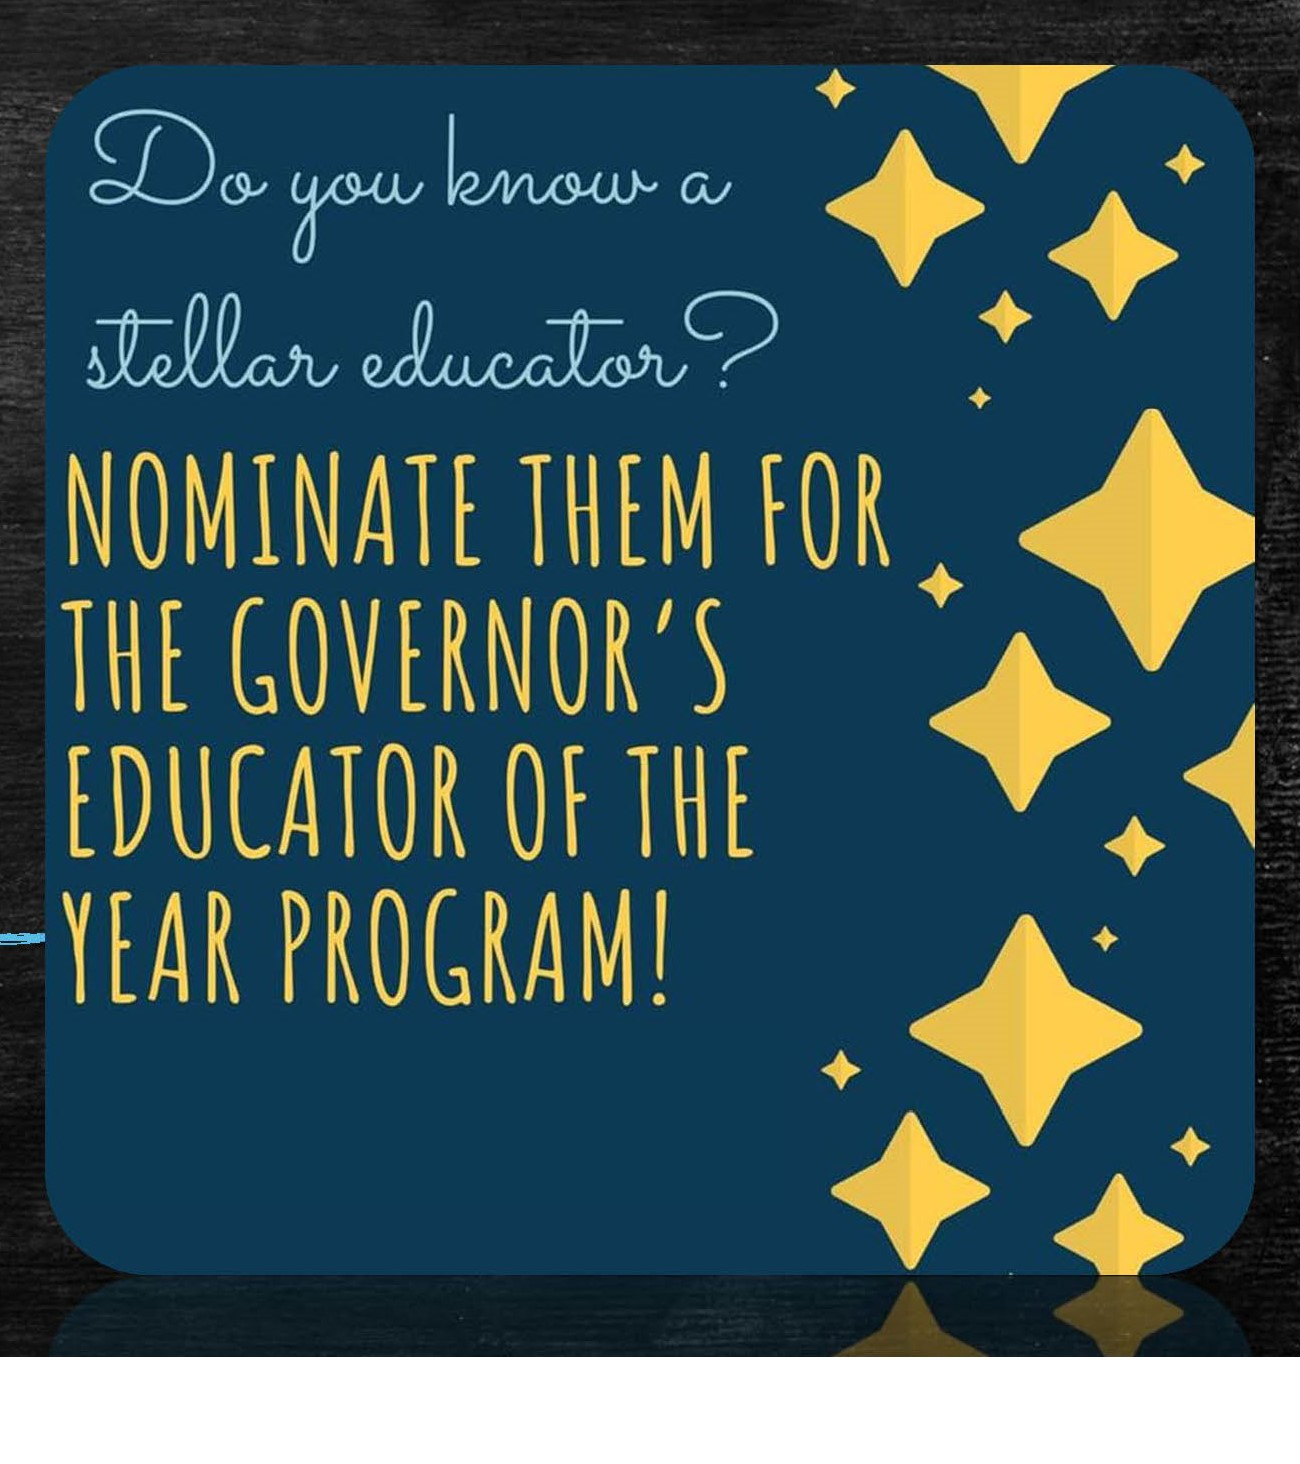 Do you know a stellar educator? Nominations now open for the Governor's Educator of the Year Program